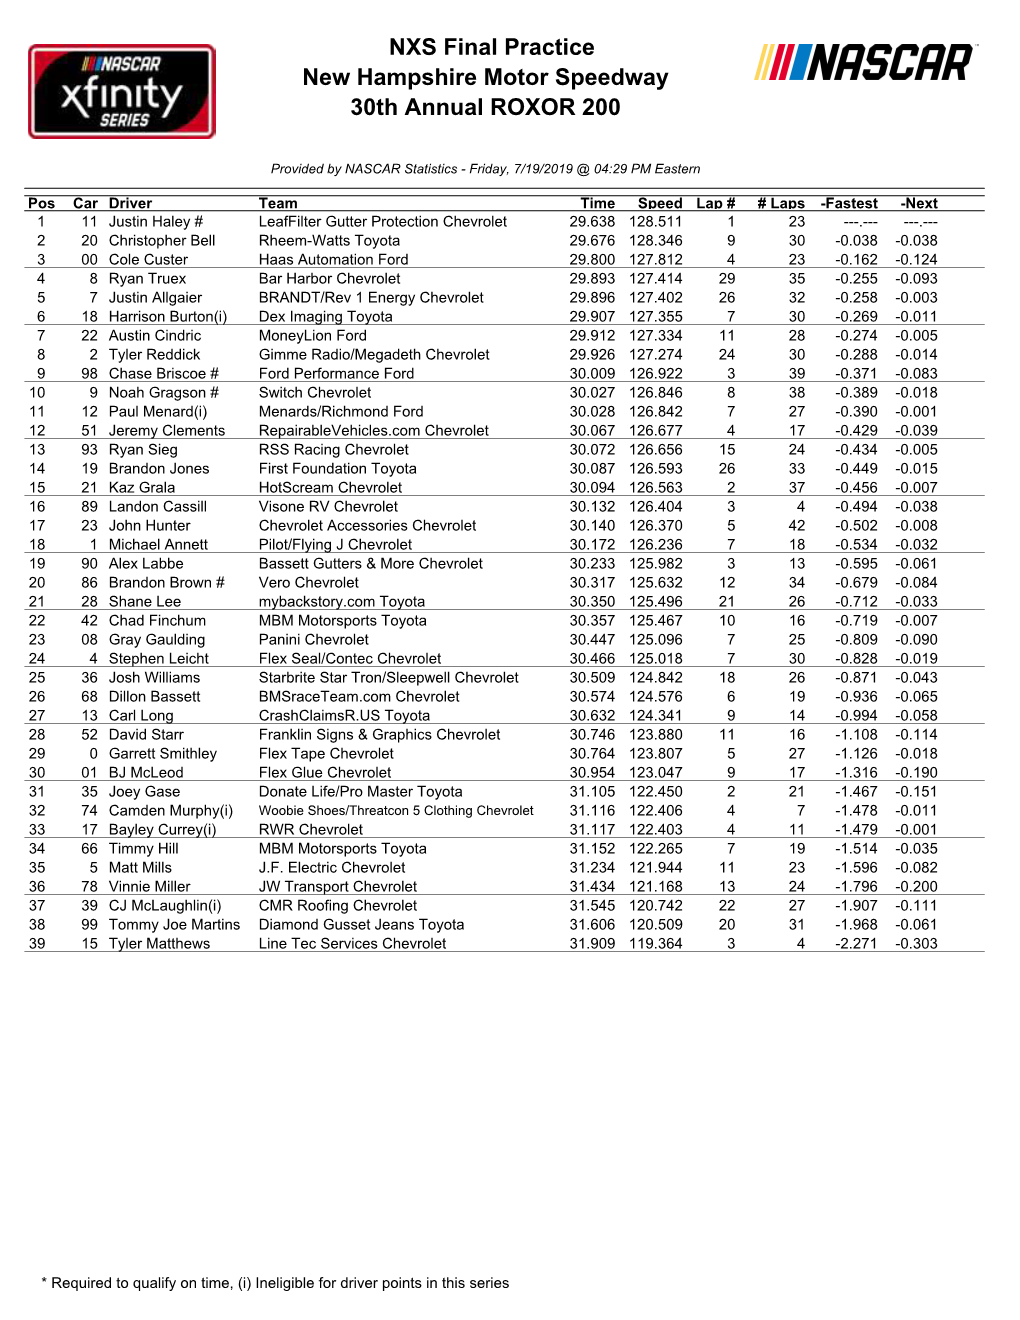 NXS Final Practice New Hampshire Motor Speedway 30Th Annual ROXOR 200